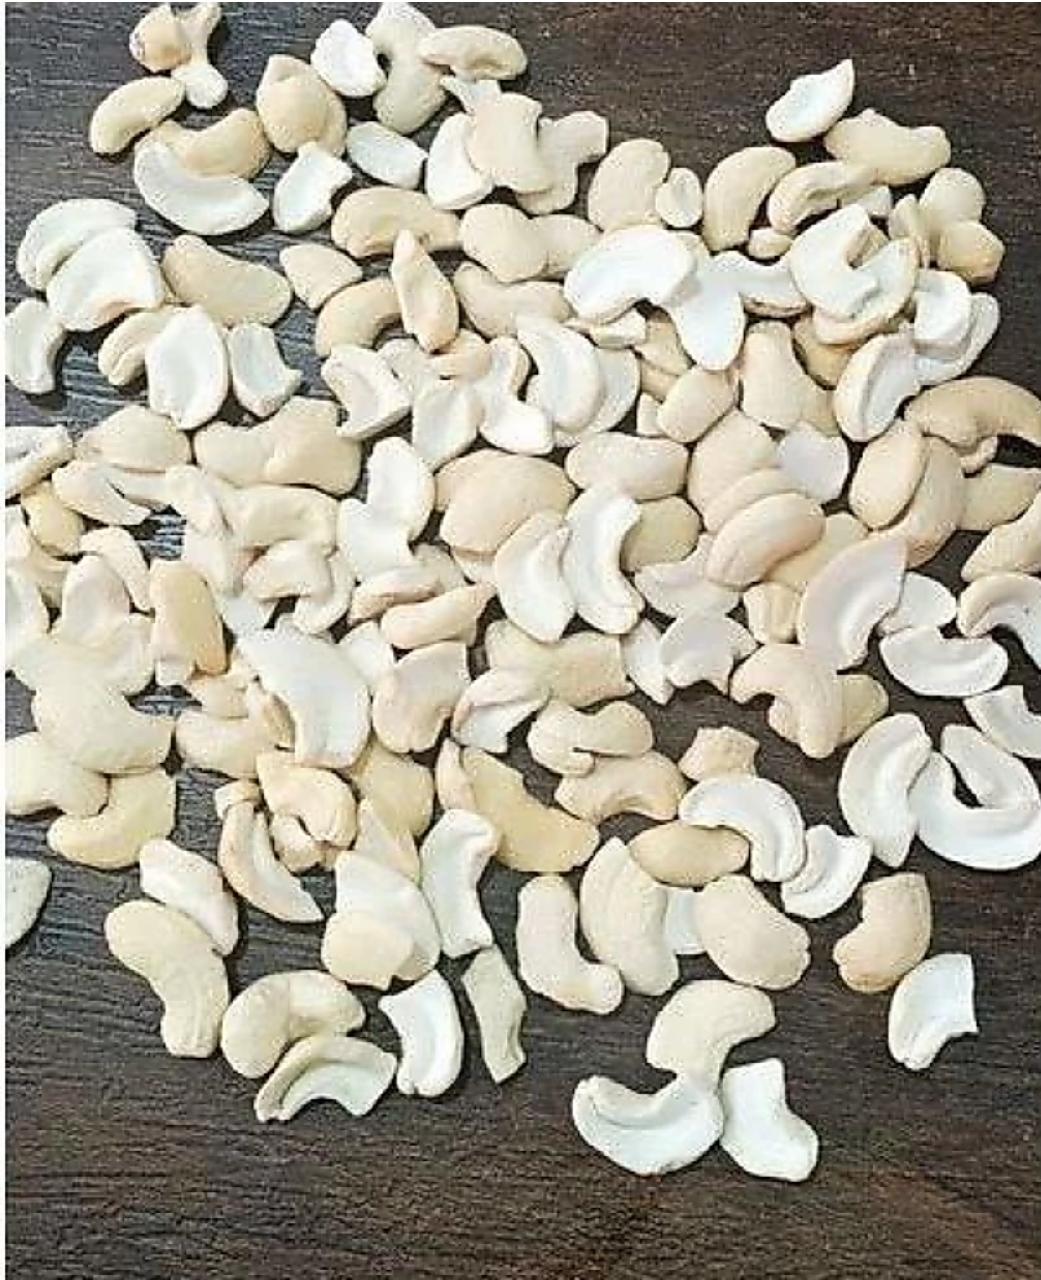 Small Pieces Dried Cashew Nuts - 100g